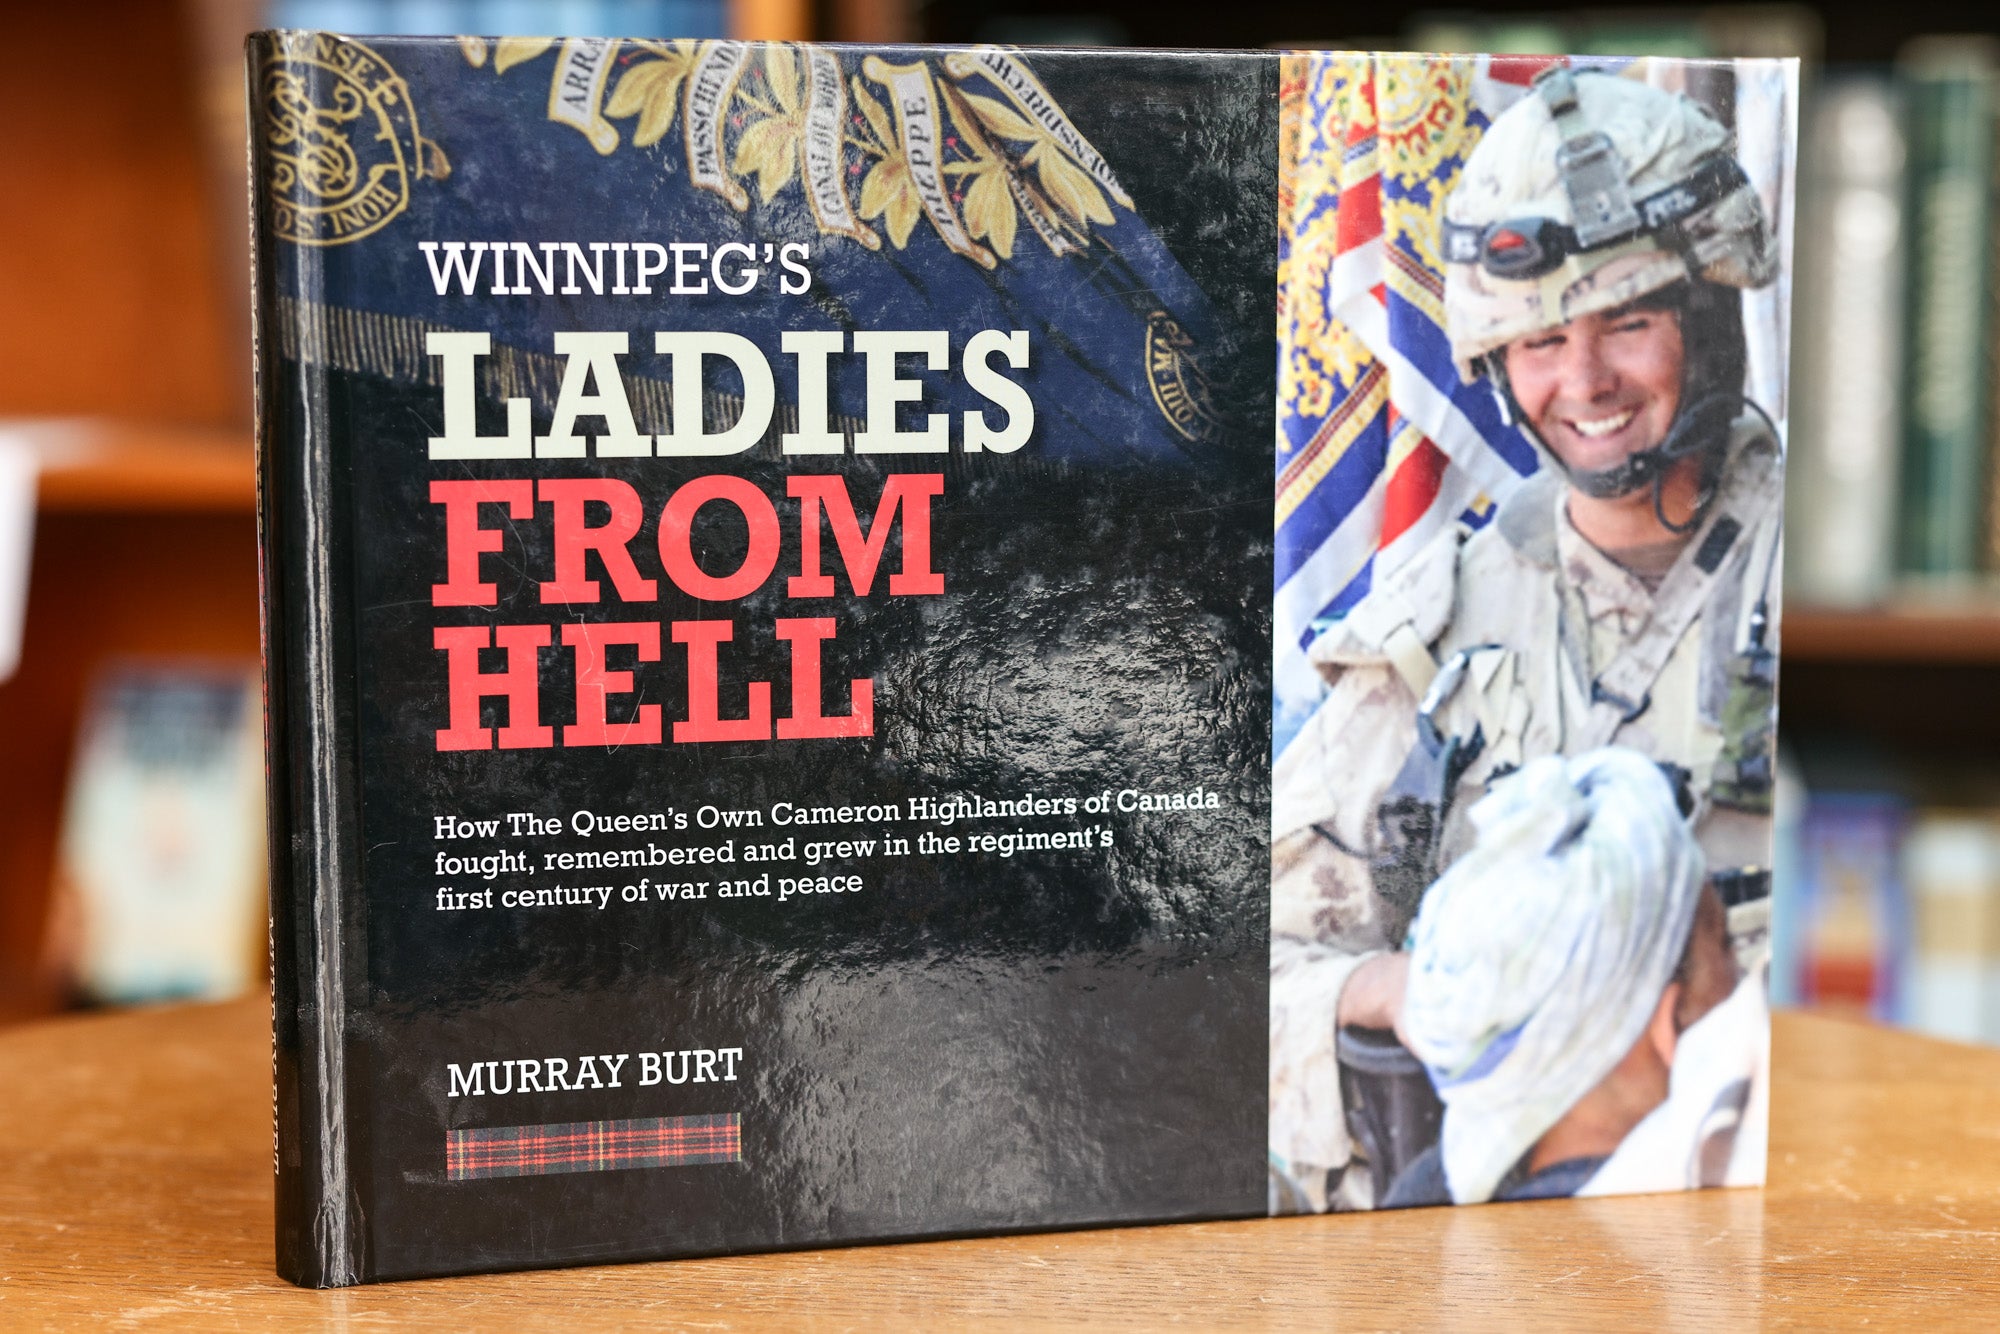 Burt, Murray - Winnipeg's Ladies from Hell; How the Queen's Own Cameron Highlanders of Canada Fought, Remembered and Grew in the Regiment's First Century of War and Peace